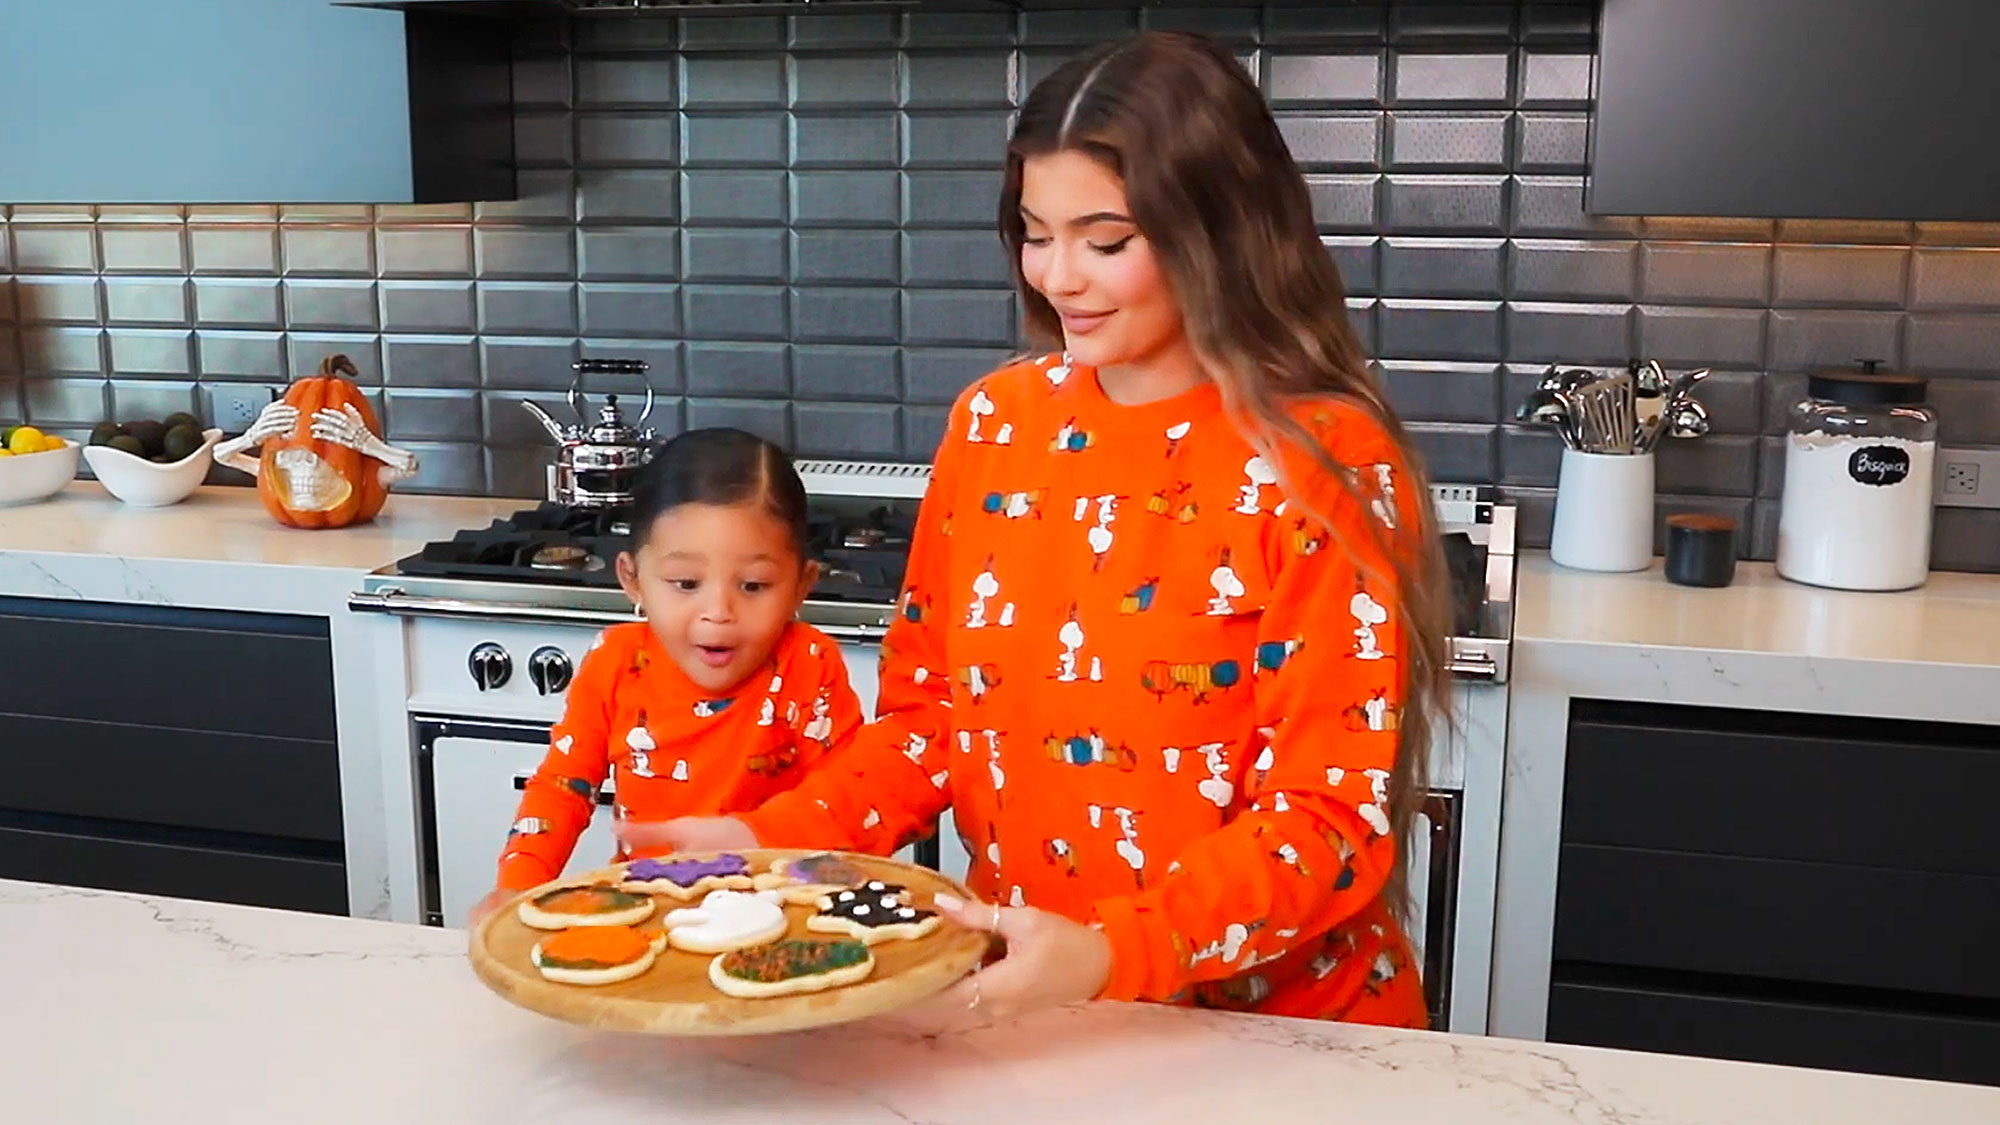 Kylie Jenner Bakes With Stormi, Reveals Halloween 2020 Costumes